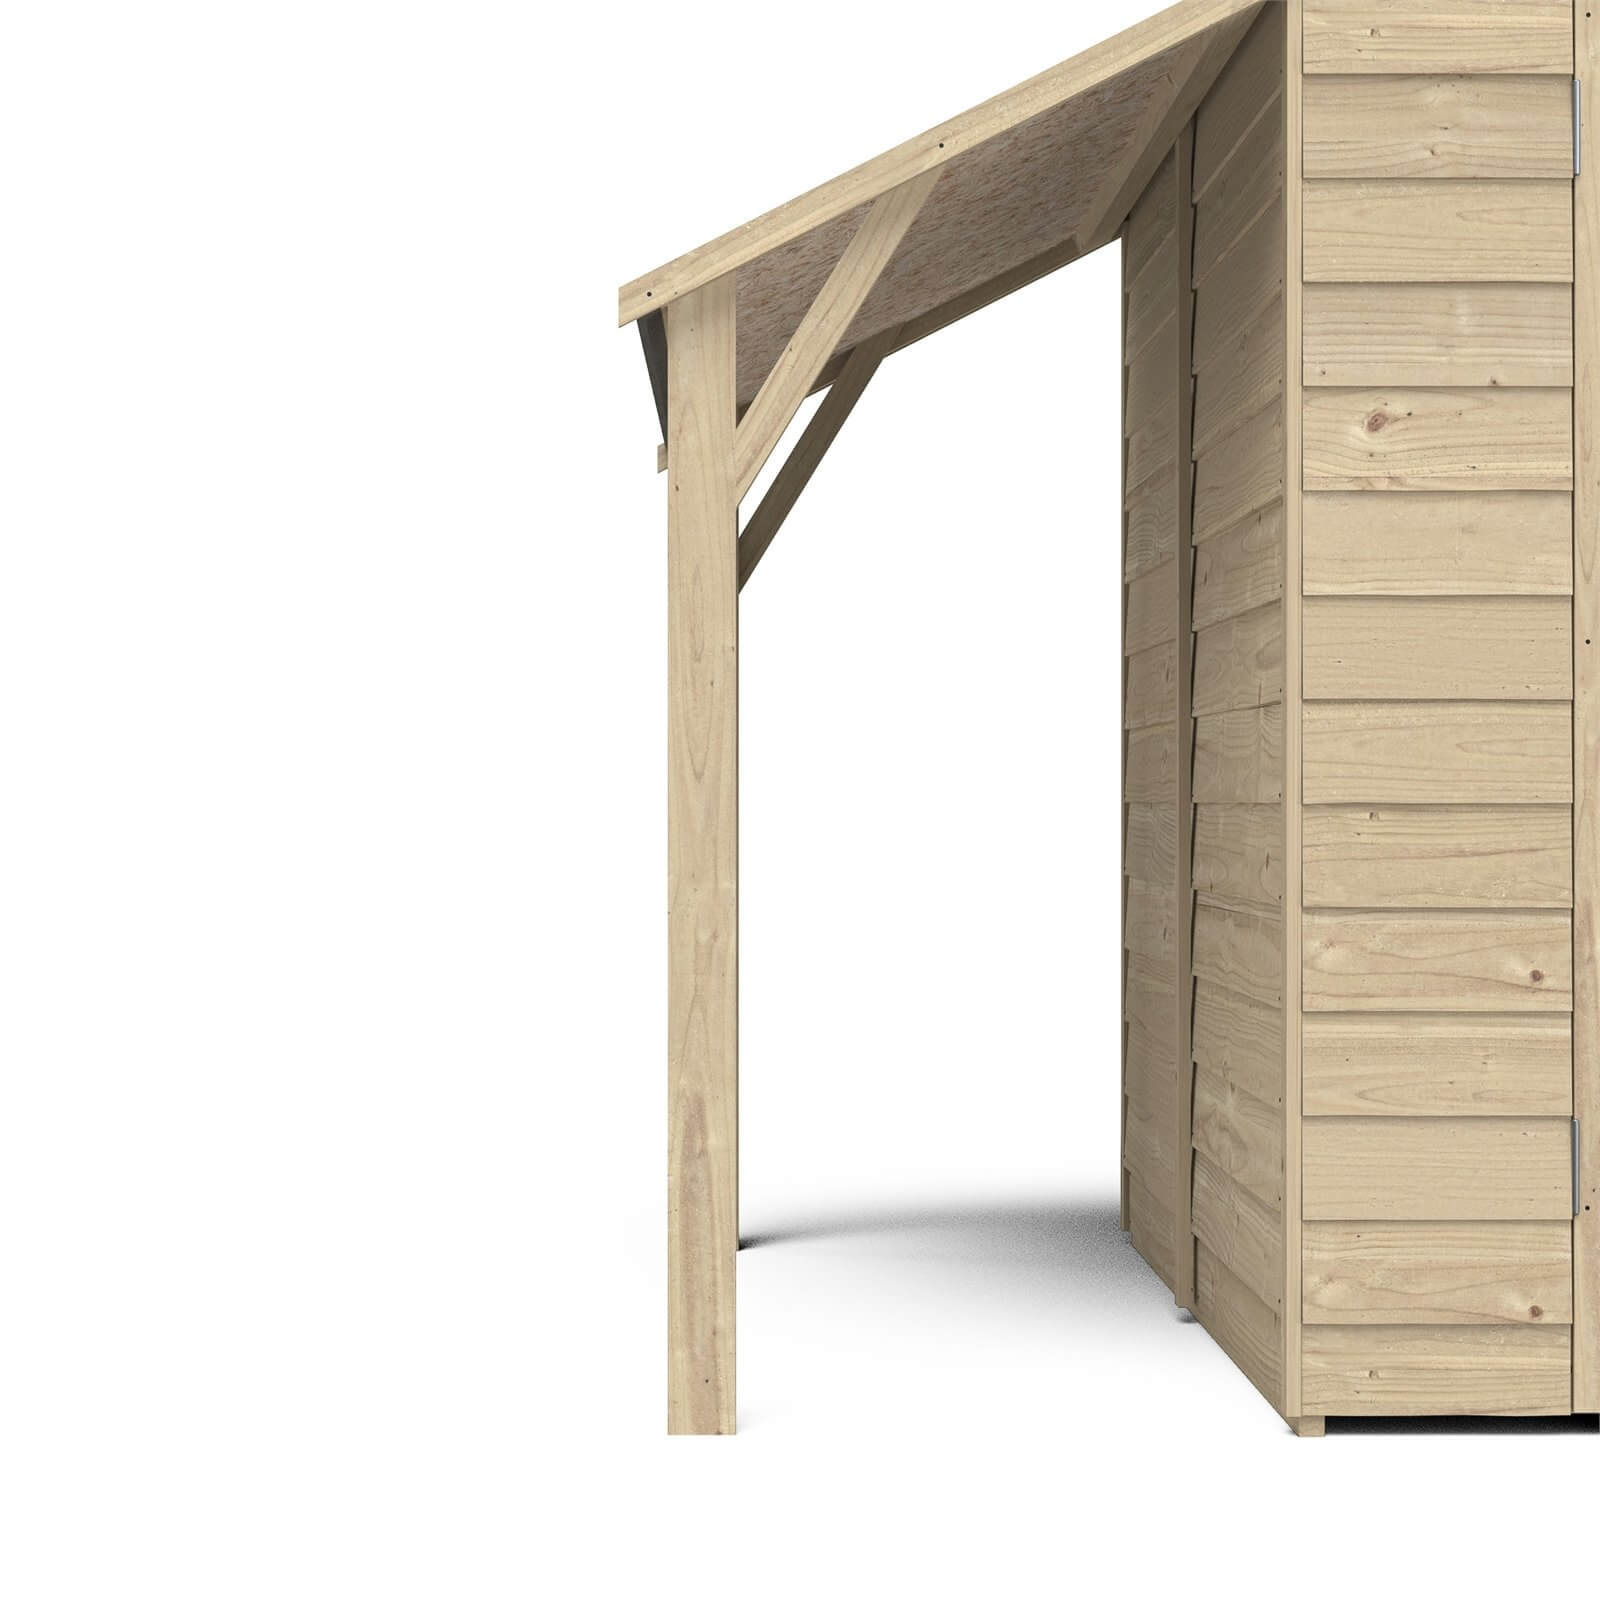 Forest Lean To Shed Kit for 6 x 4ft Overlap Pressure Treated Sheds